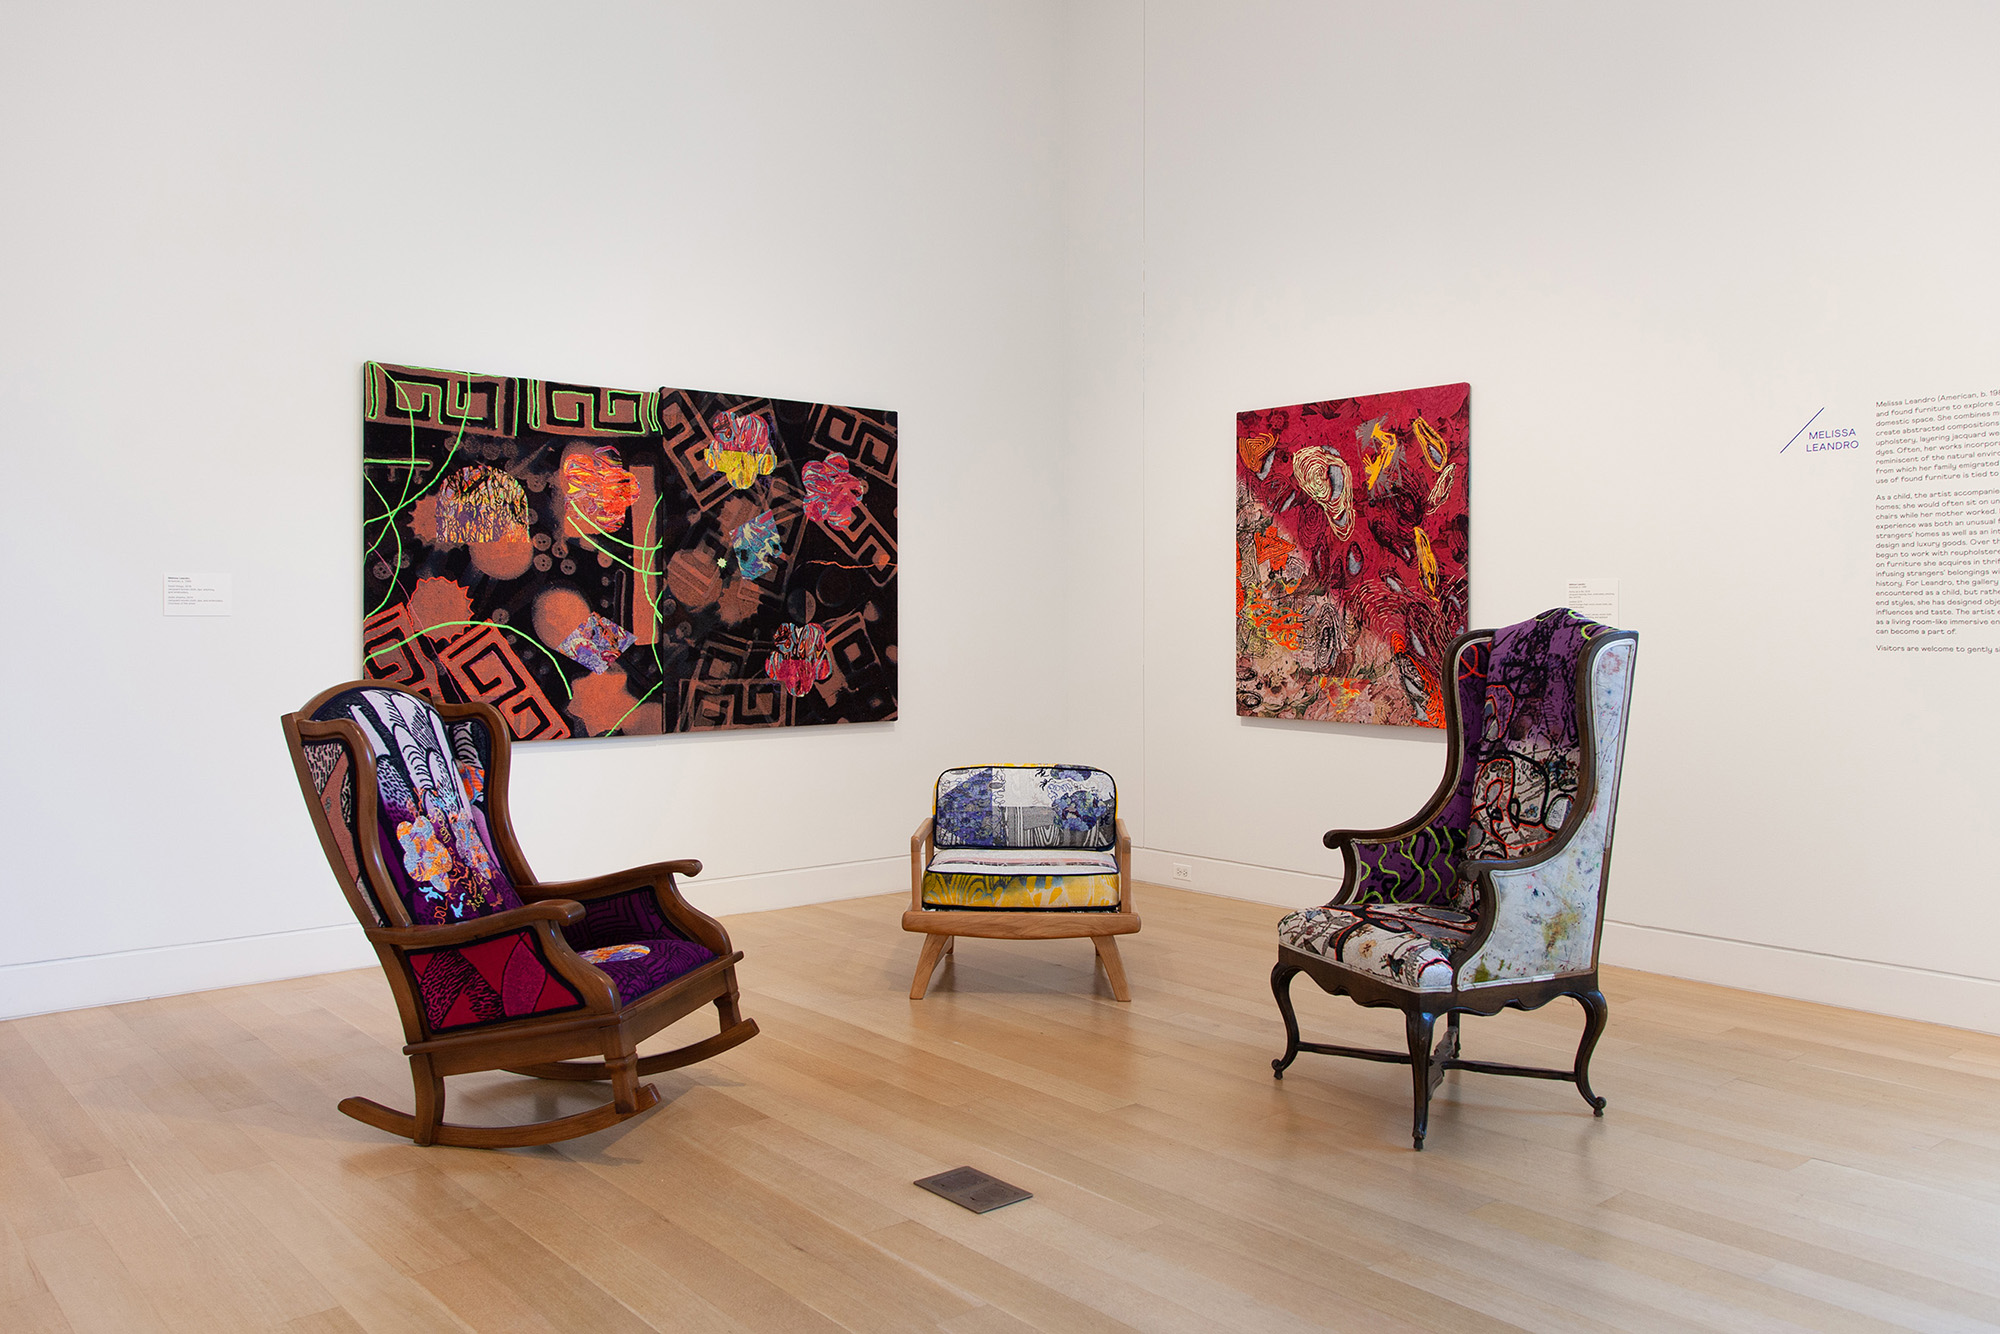 Melissa Leandro in Remember Where You Are, installation view at DePaul Art Museum, 2019. Photo: DePaul Art Museum